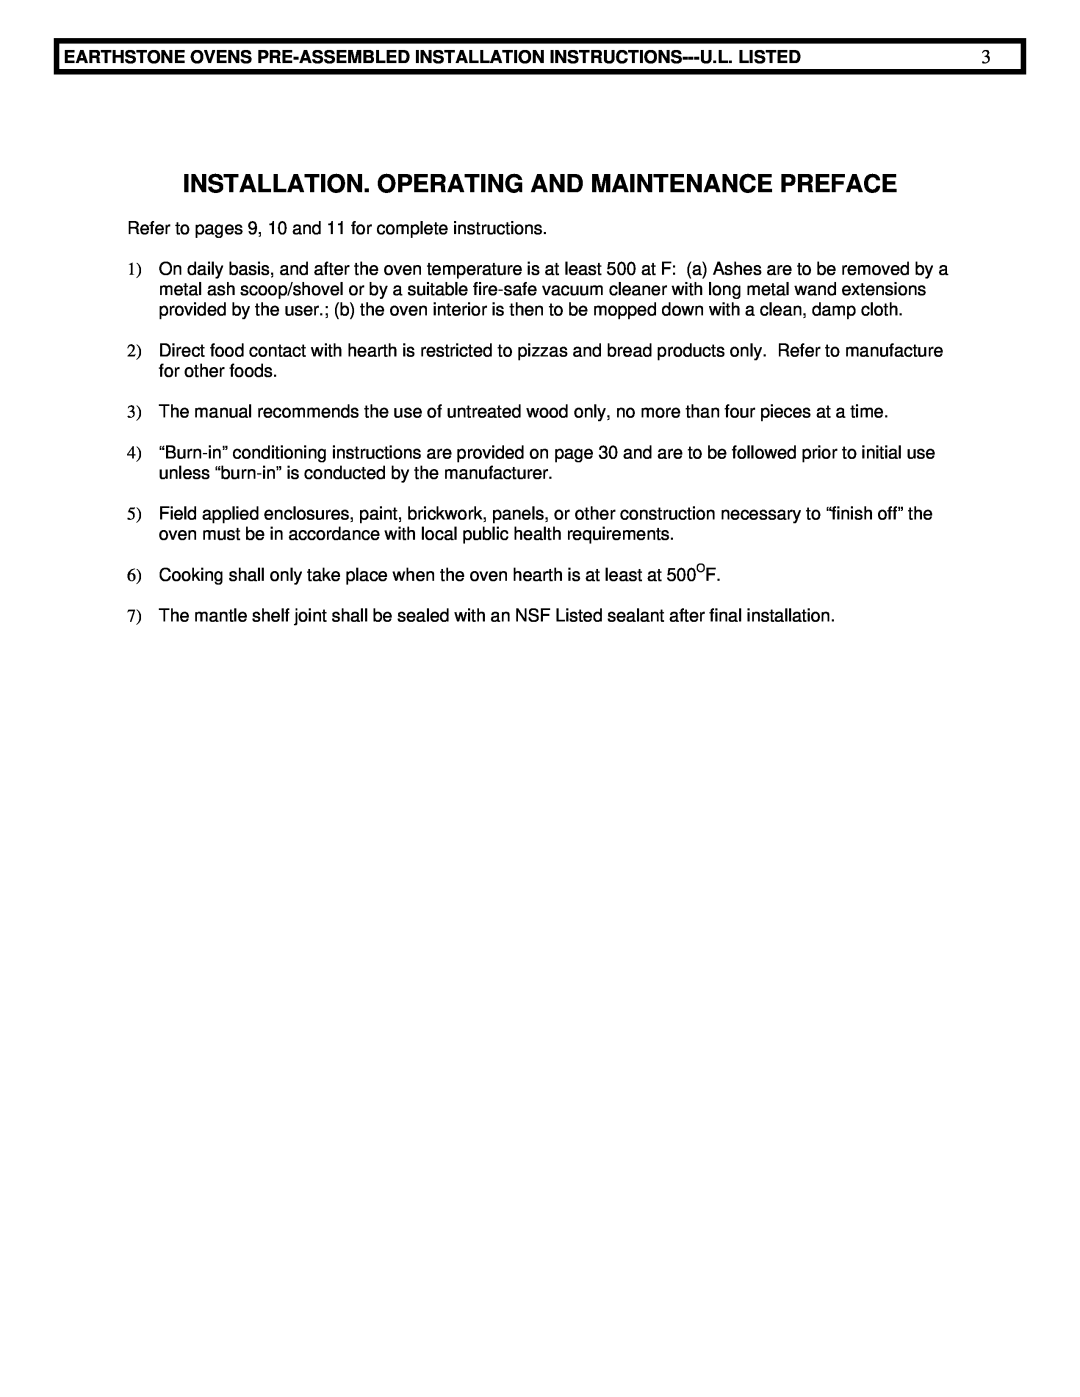 EarthStone woofire oven installation instructions Installation. Operating And Maintenance Preface 